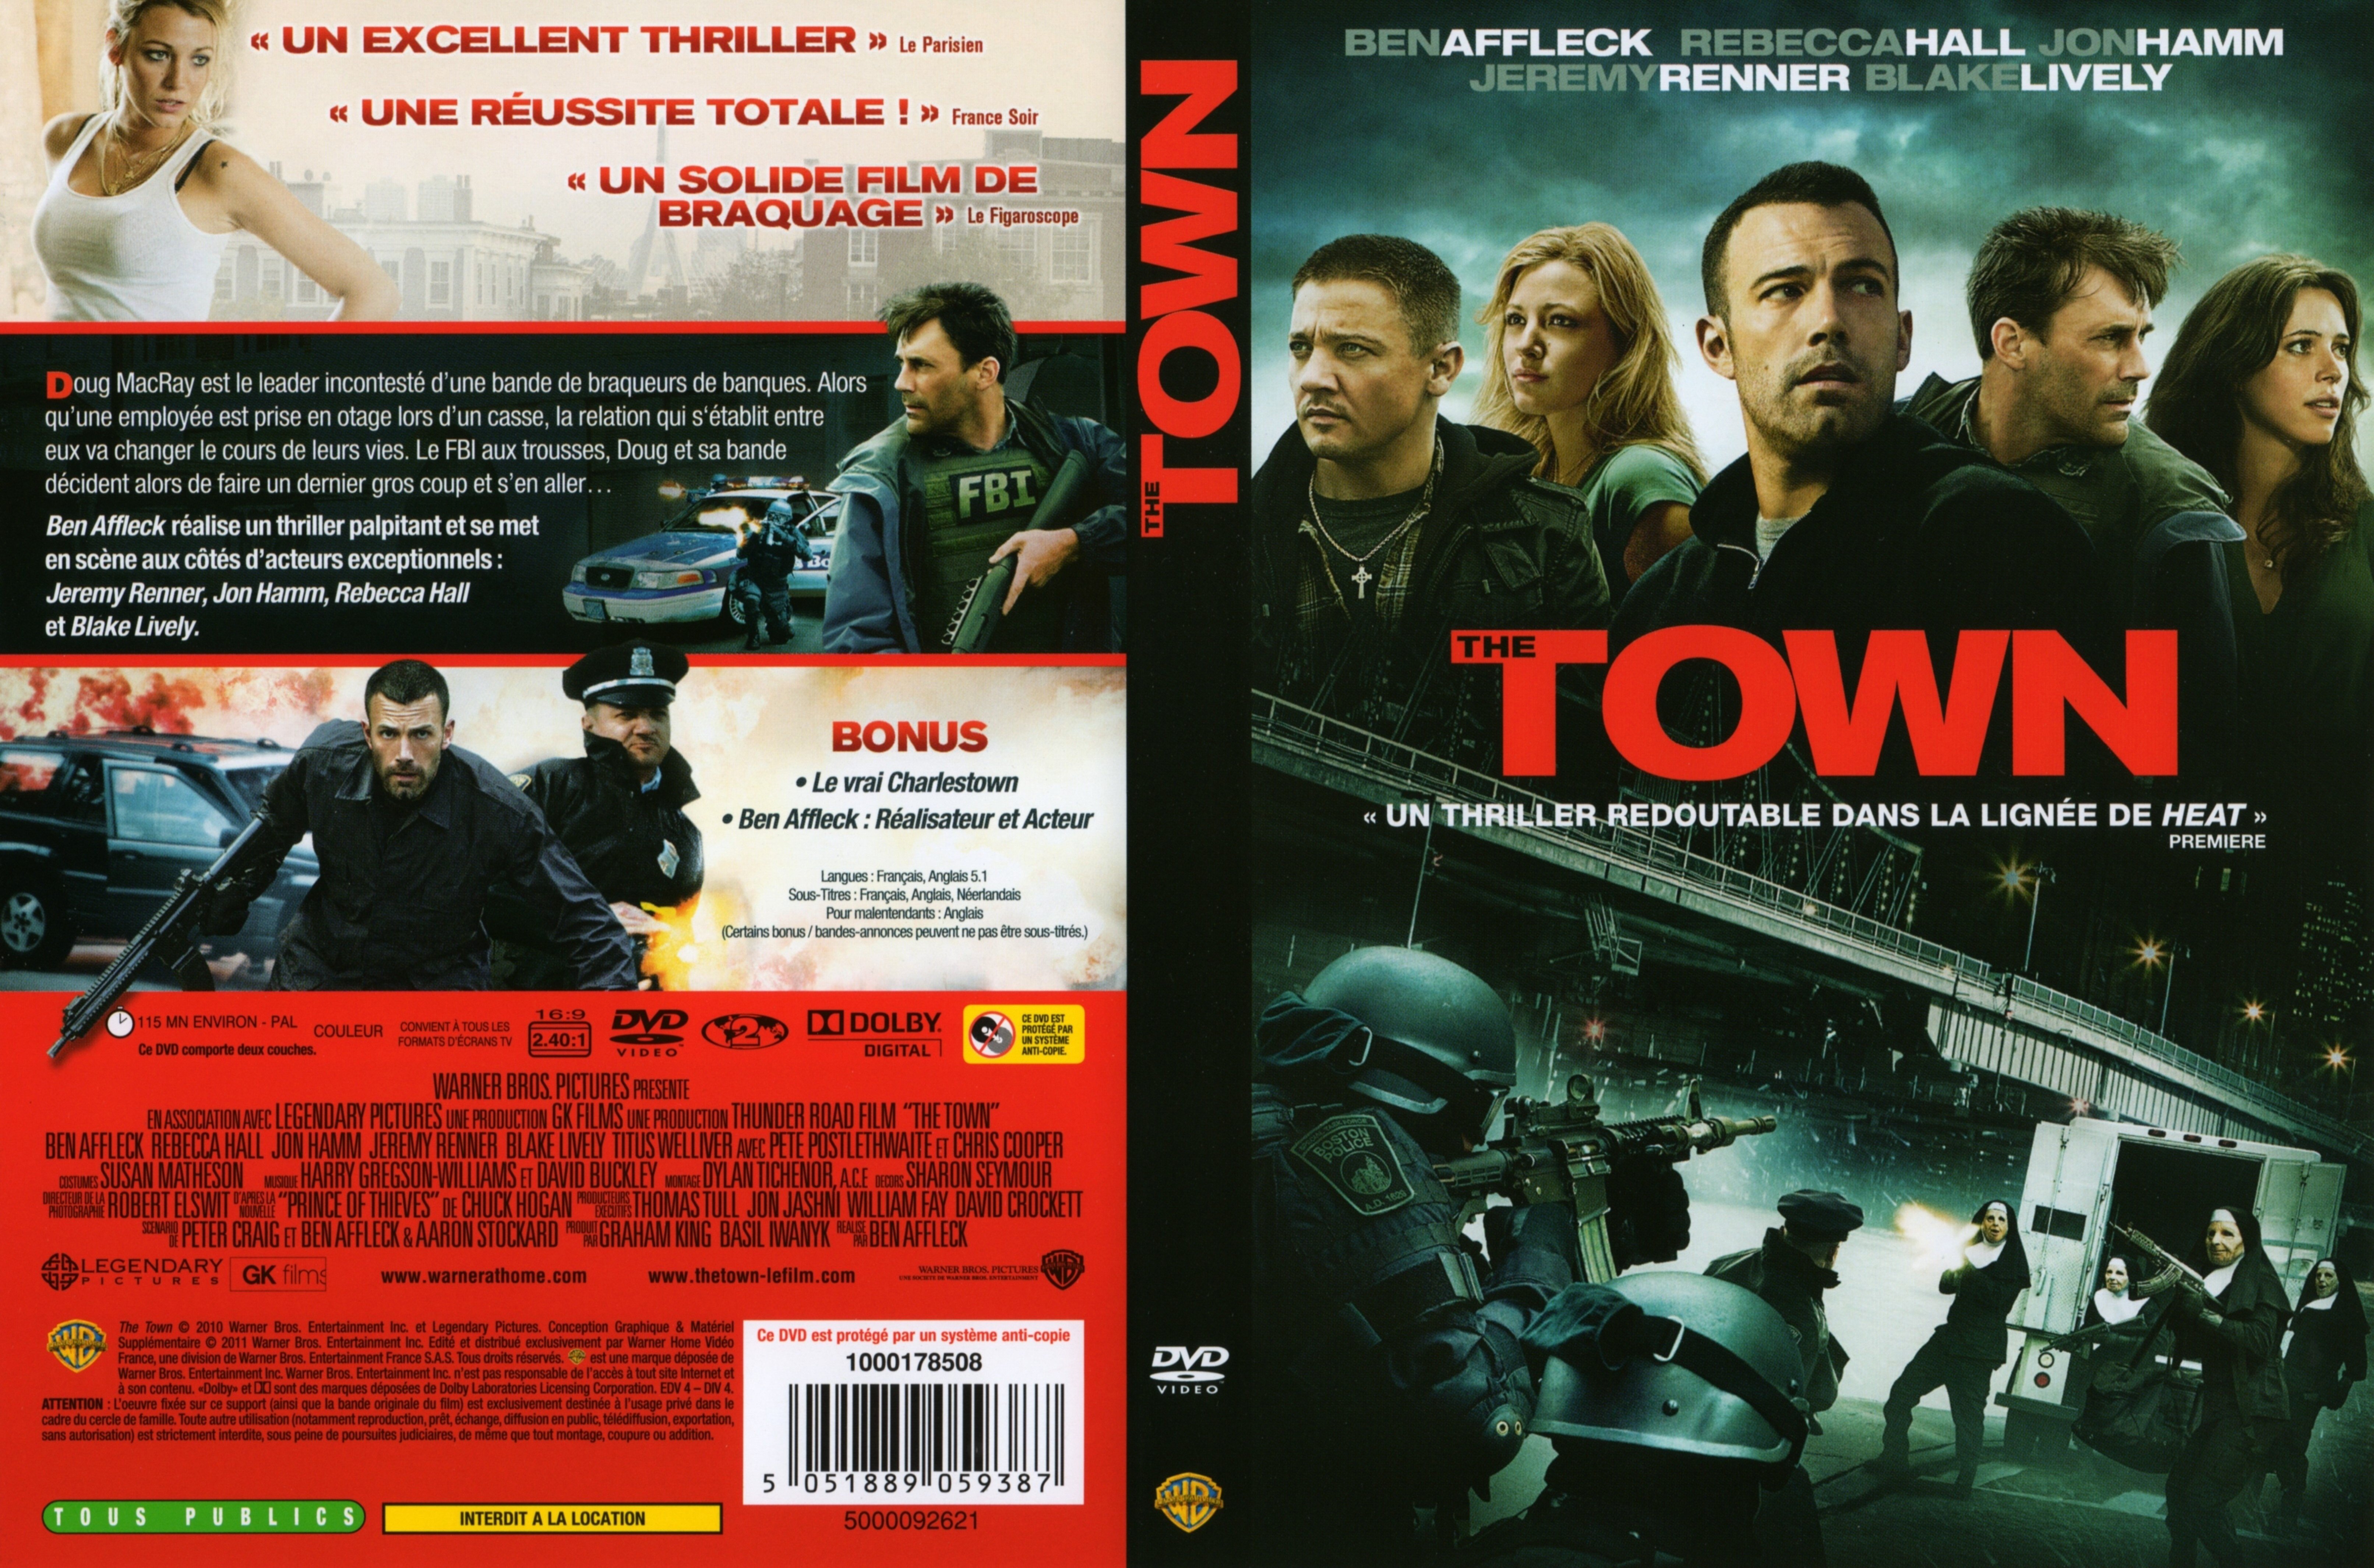 Jaquette DVD The town